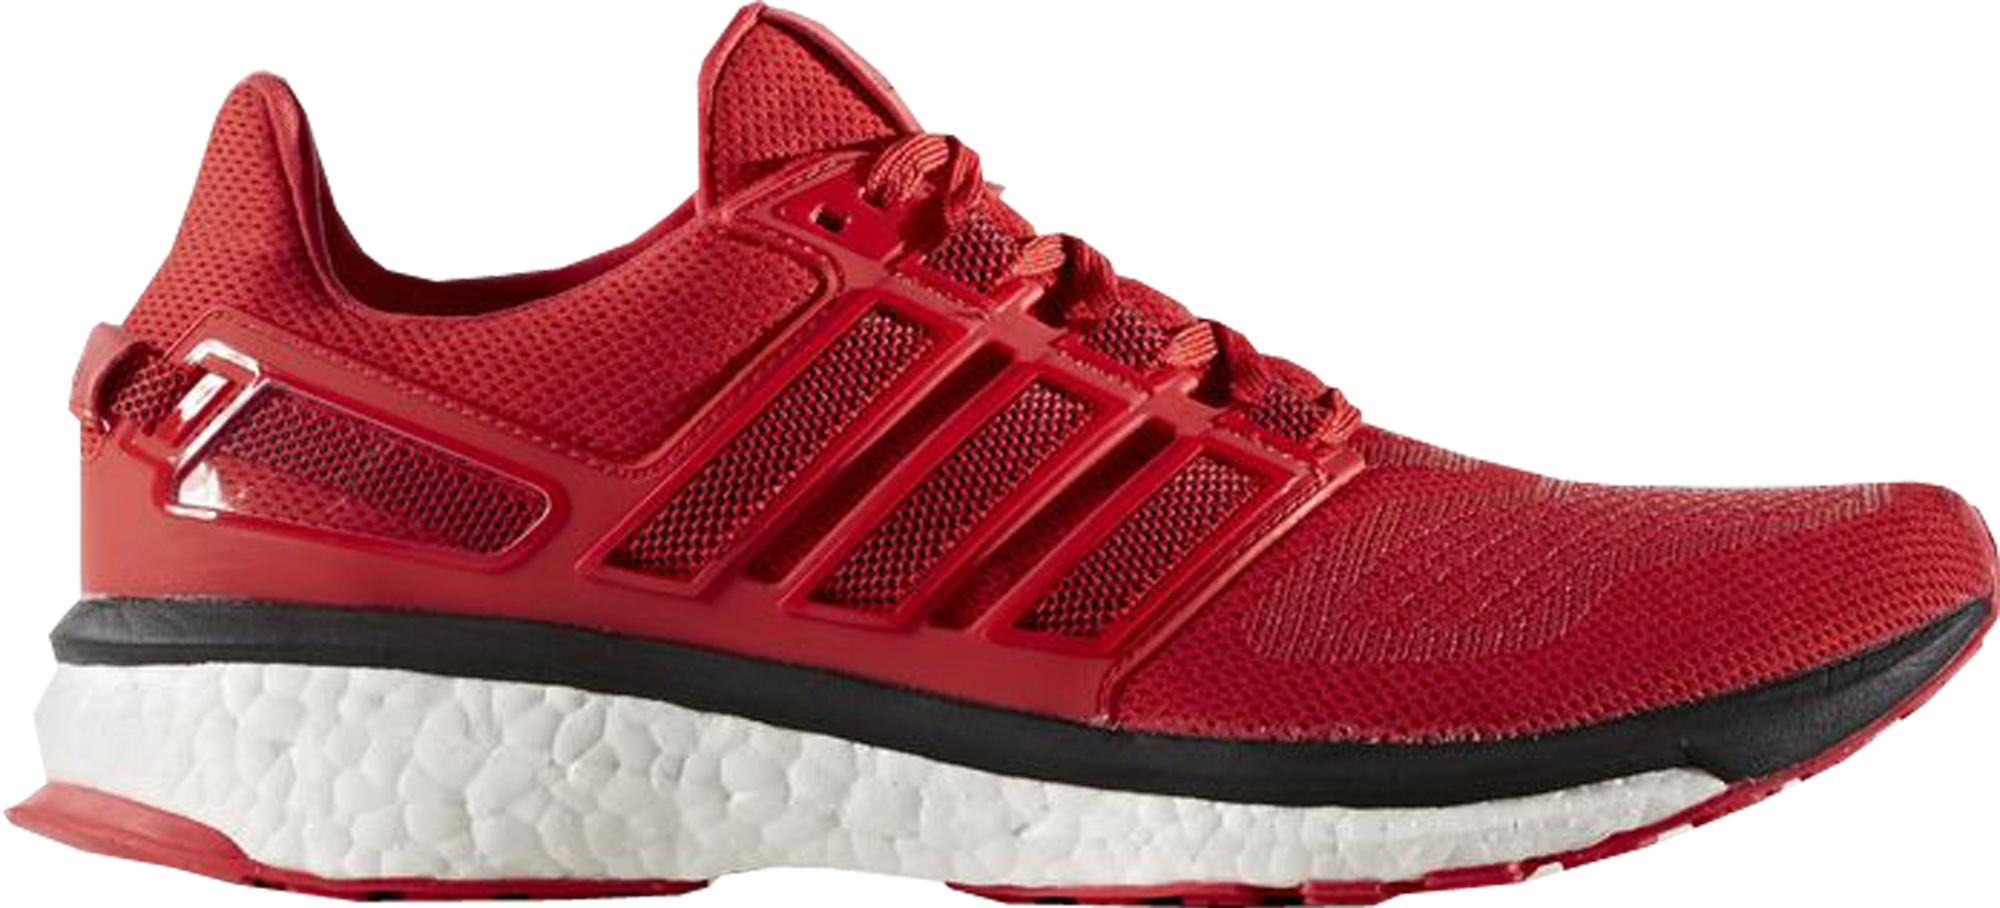 adidas energy boost 3 release date